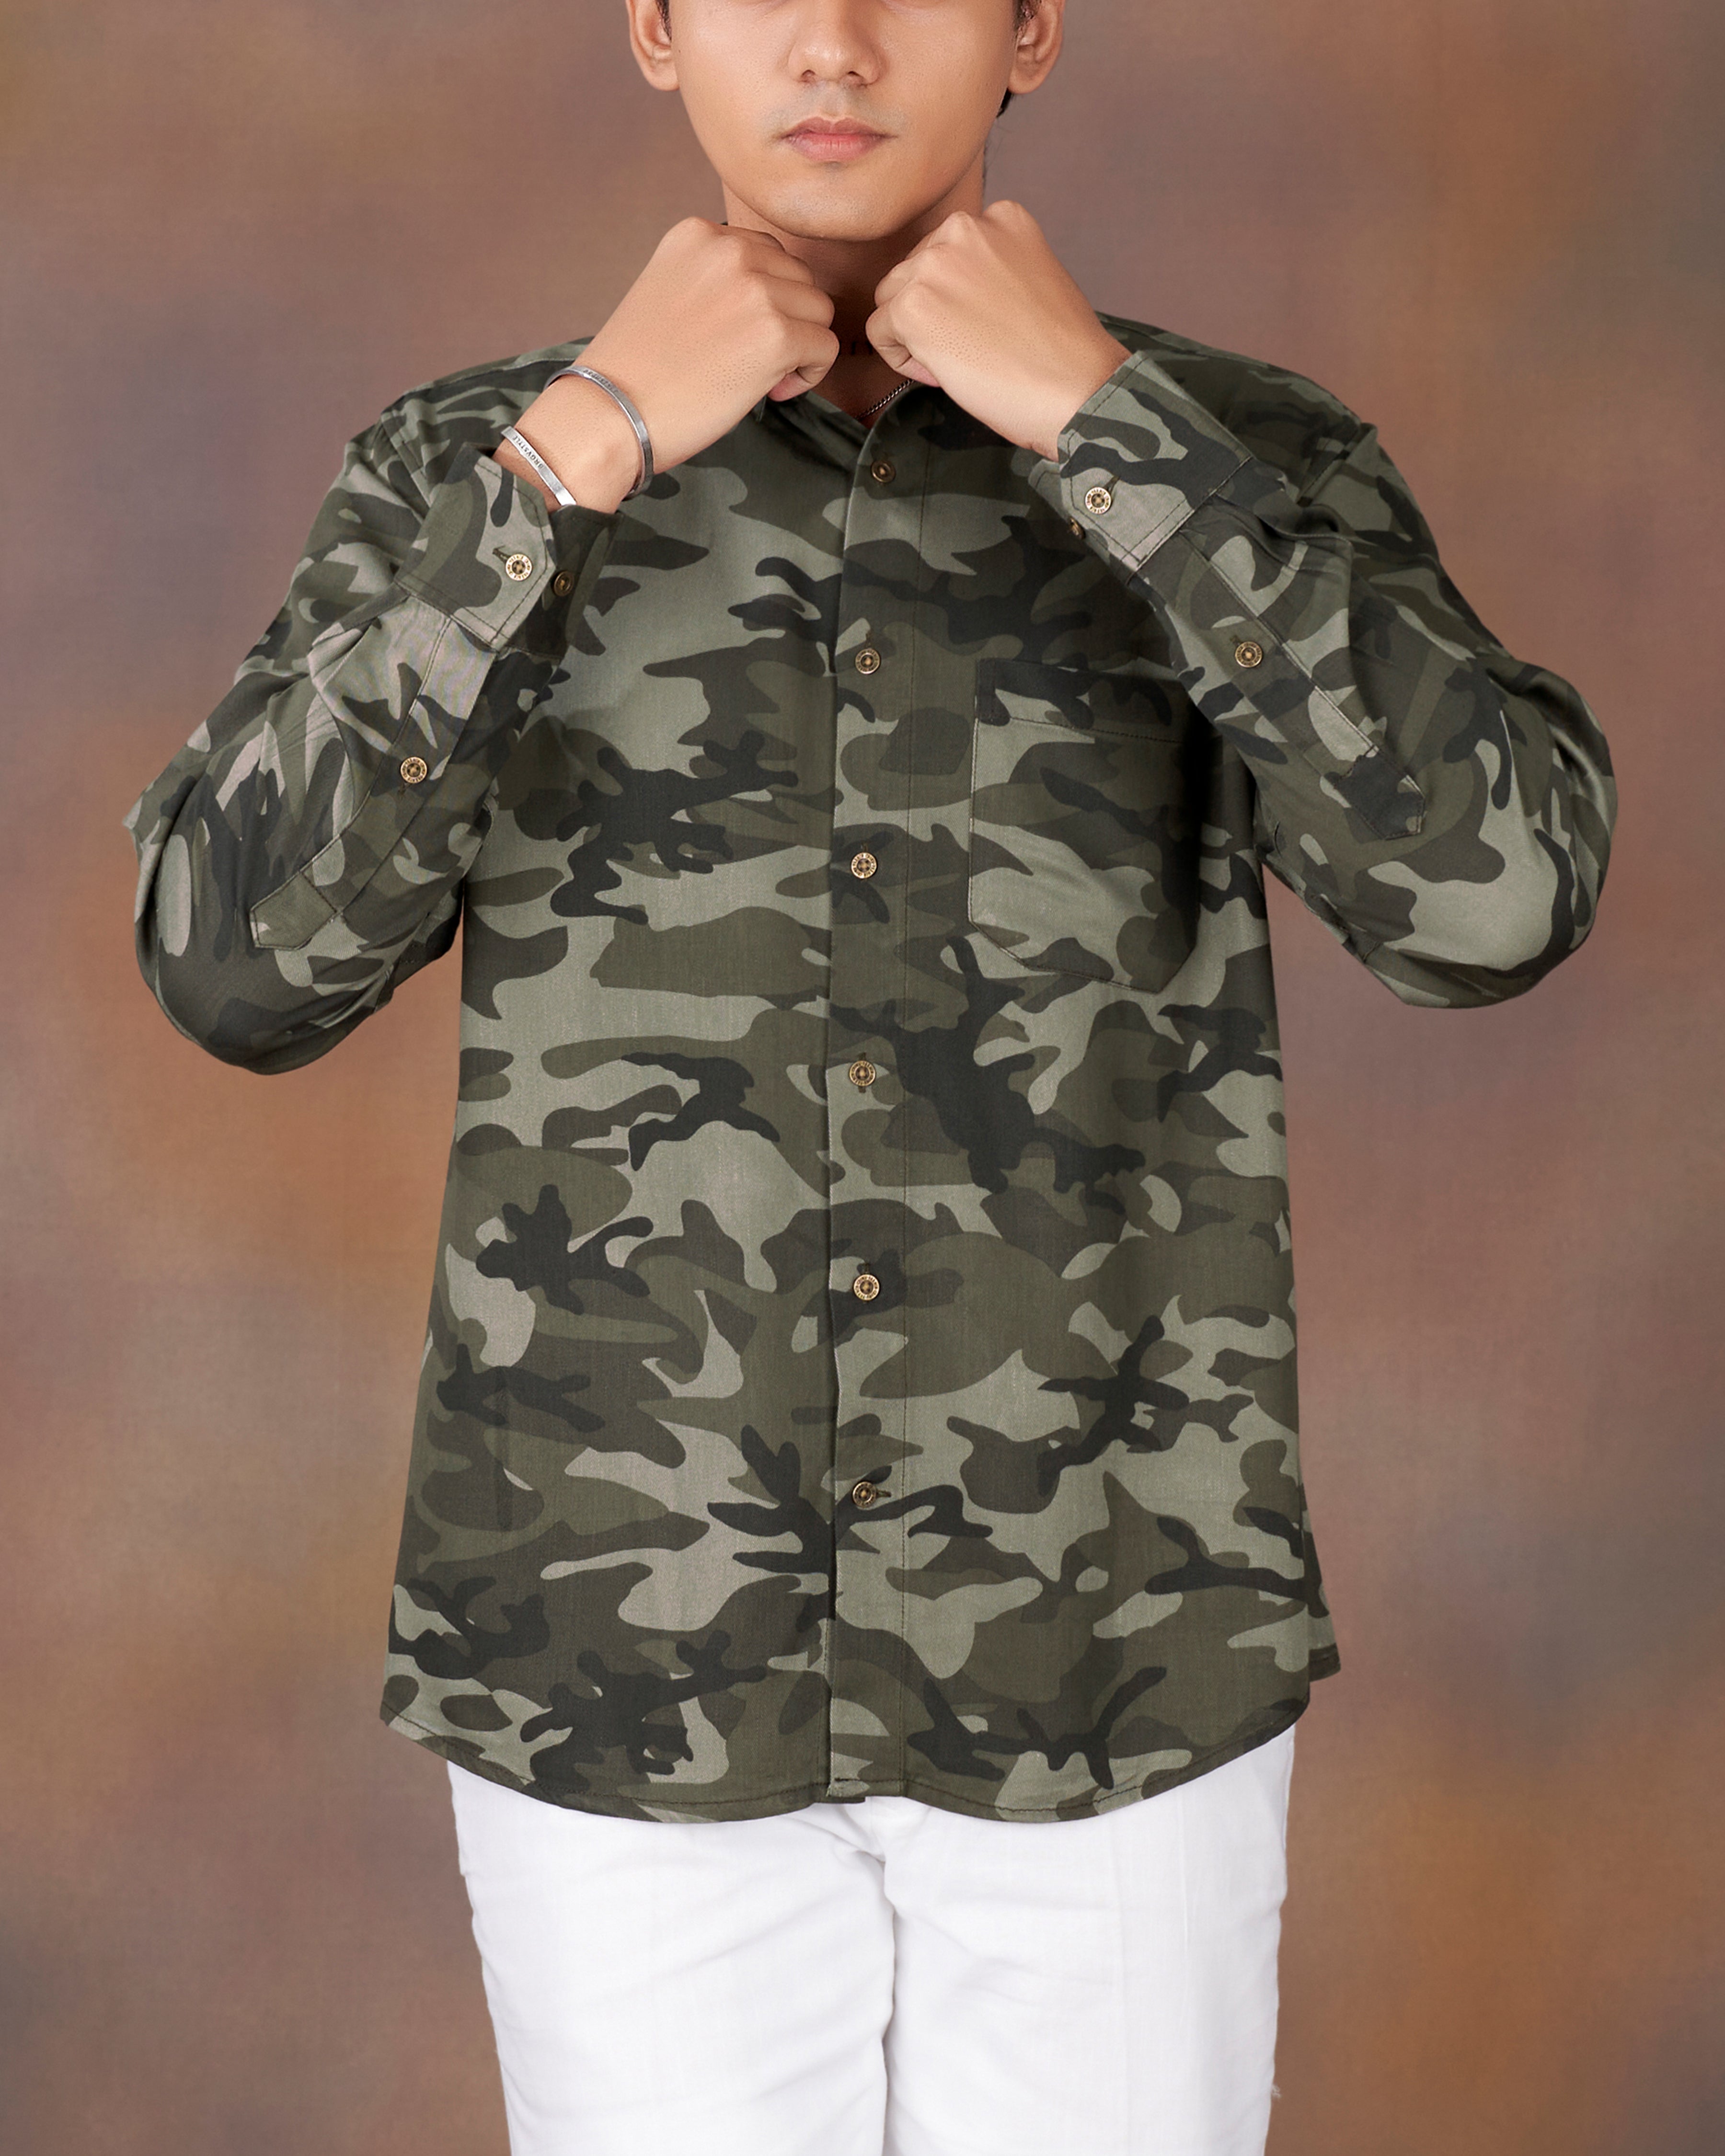 Lunar Green with Concord Gray Camouflage Printed  Premium Tencel Shirt